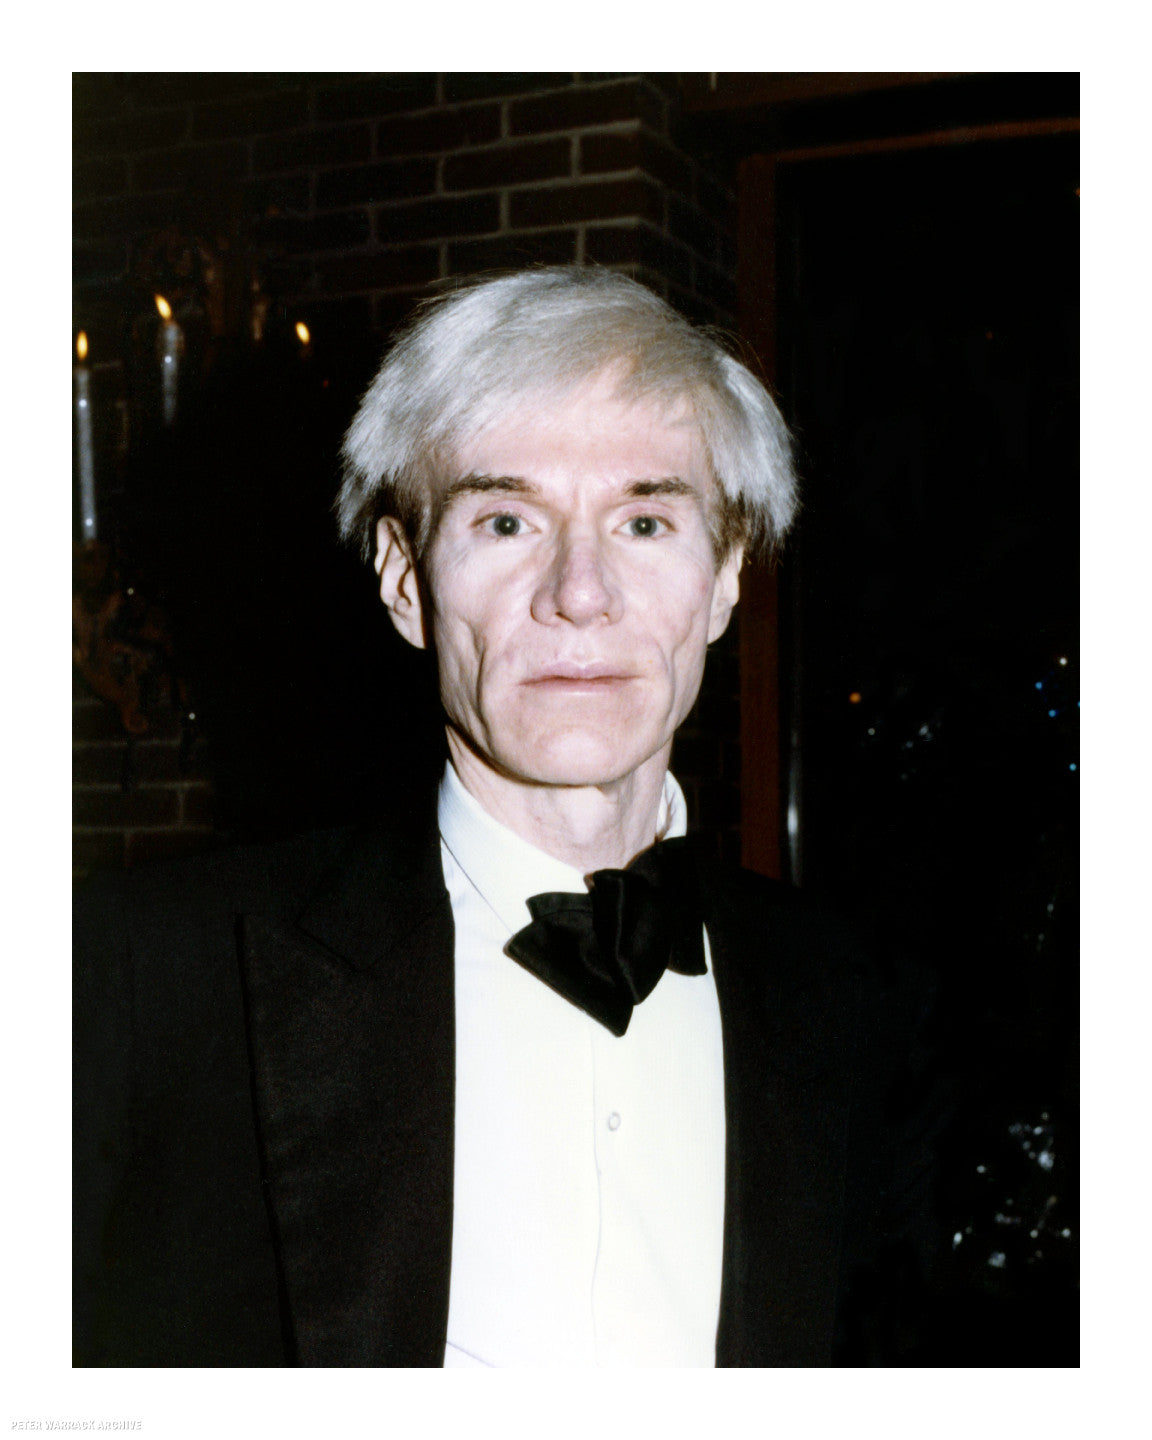 Andy Warhol (by Peter Warrack) - Limited Edition, Set of 3 Archival Prints - 8x10&quot;